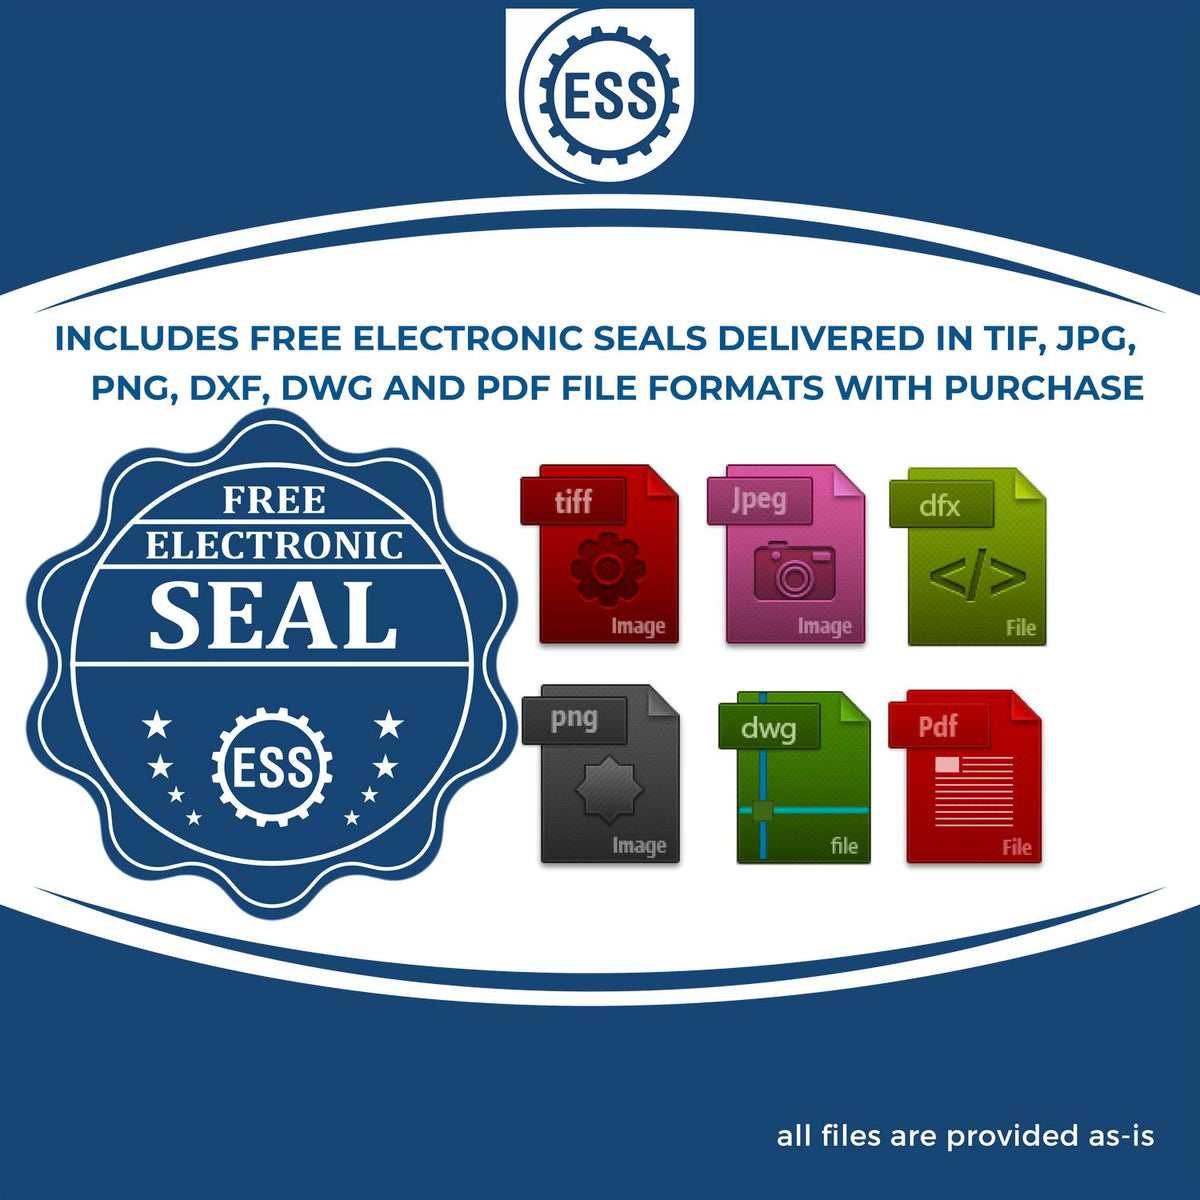 An infographic for the free electronic seal for the Hybrid Missouri Architect Seal illustrating the different file type icons such as DXF, DWG, TIF, JPG and PNG.